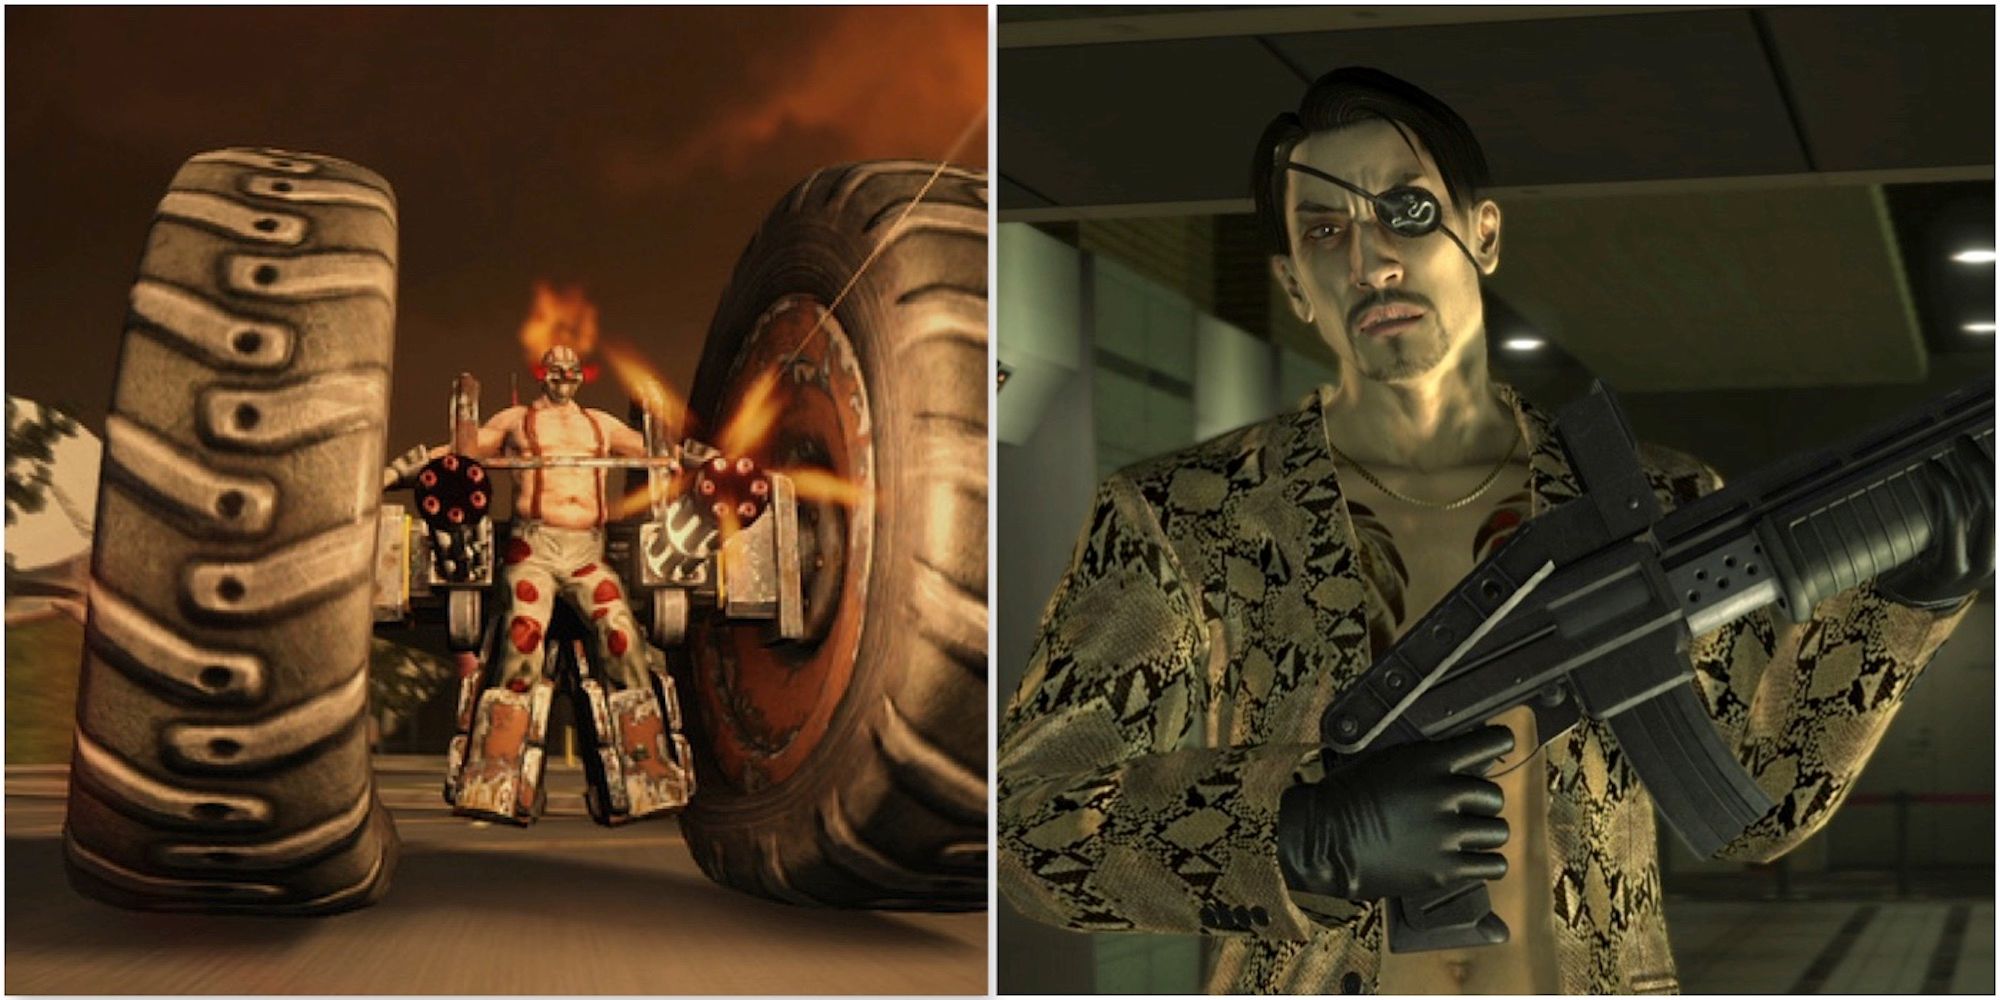 Sweet Tooth from Twisted Metal and Goro from Yakuza Dead Souls